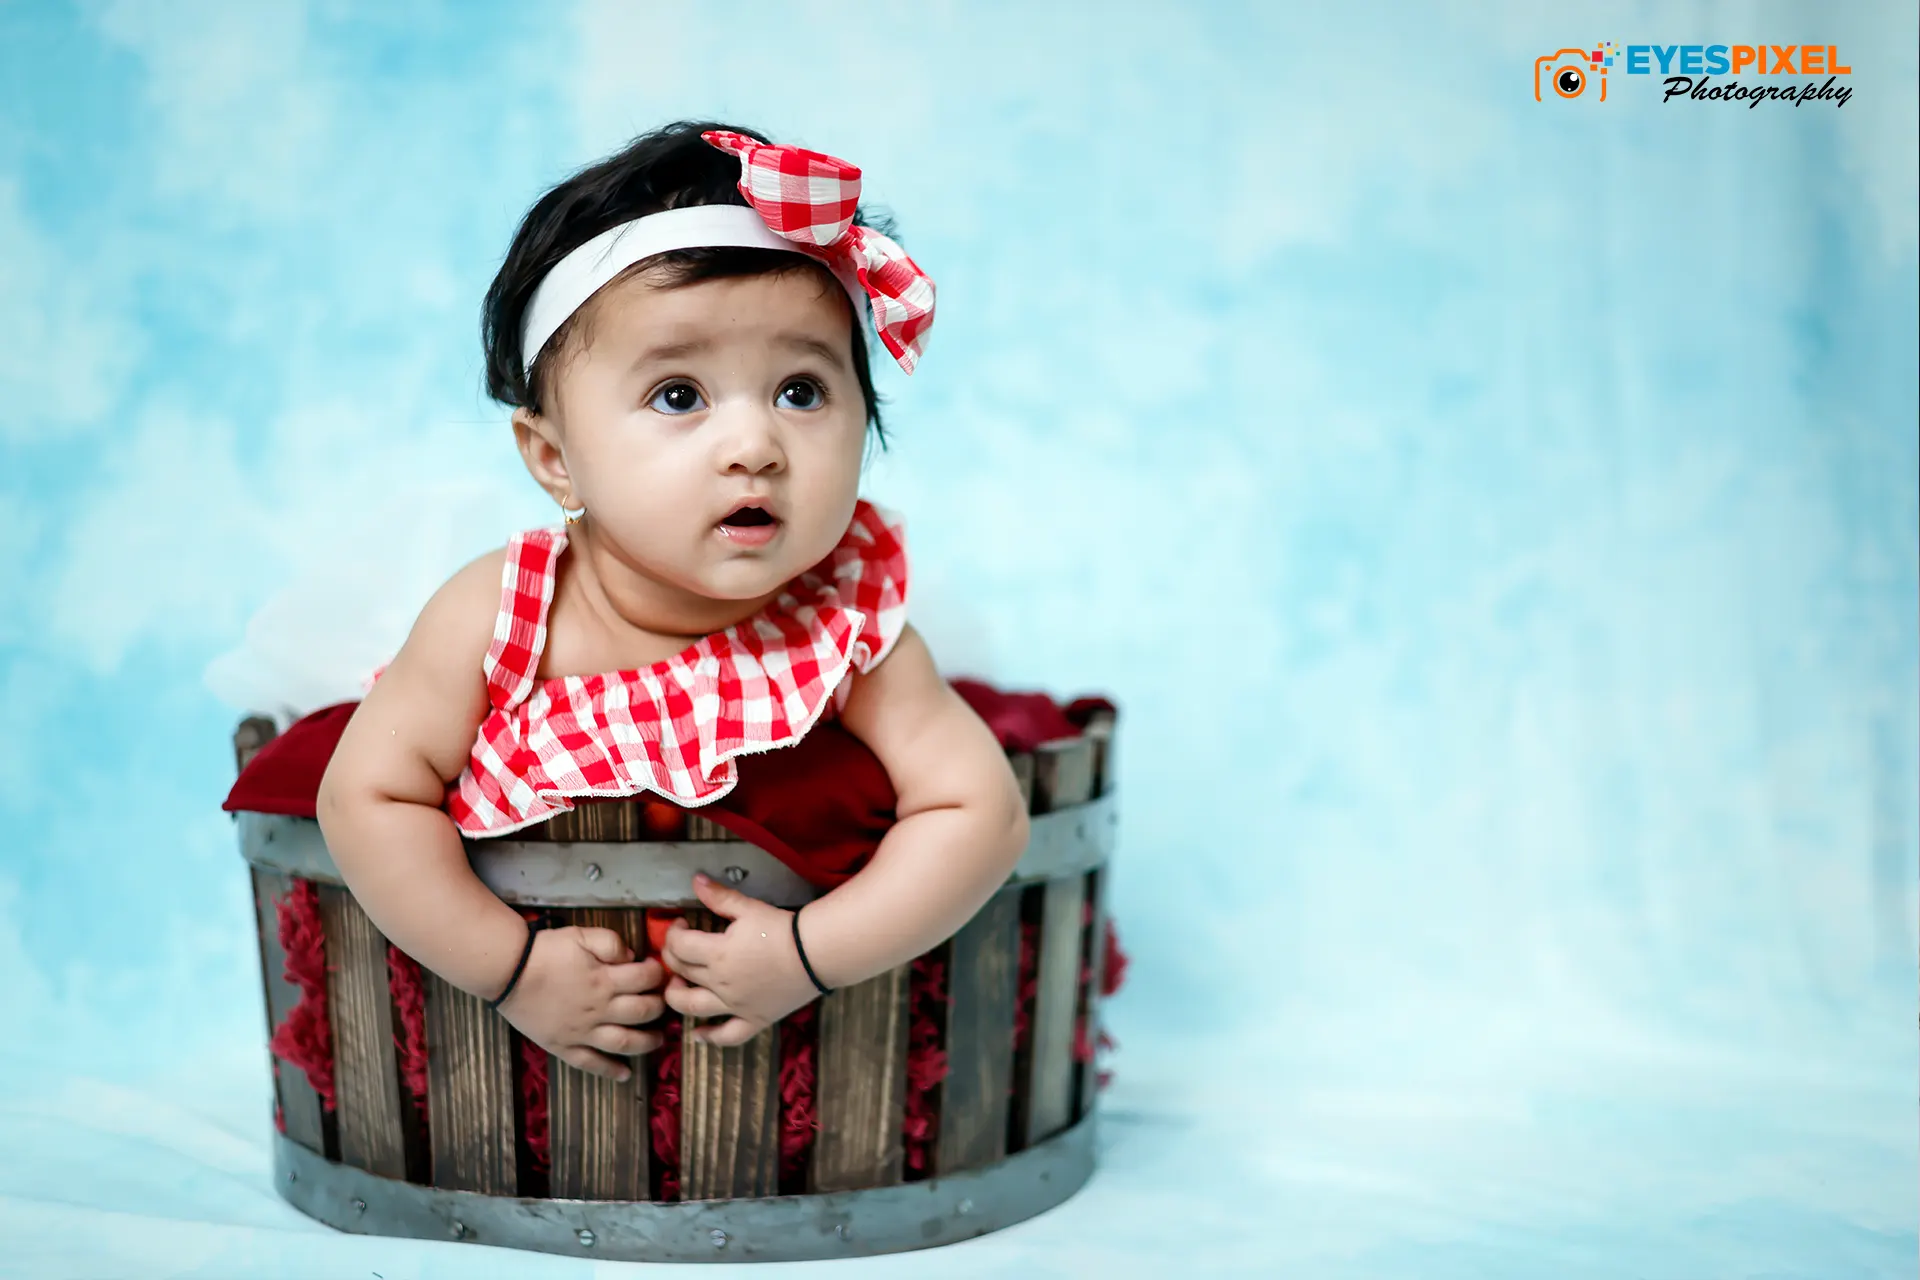 Top Newborn Baby and Maternity Photographers in Pune